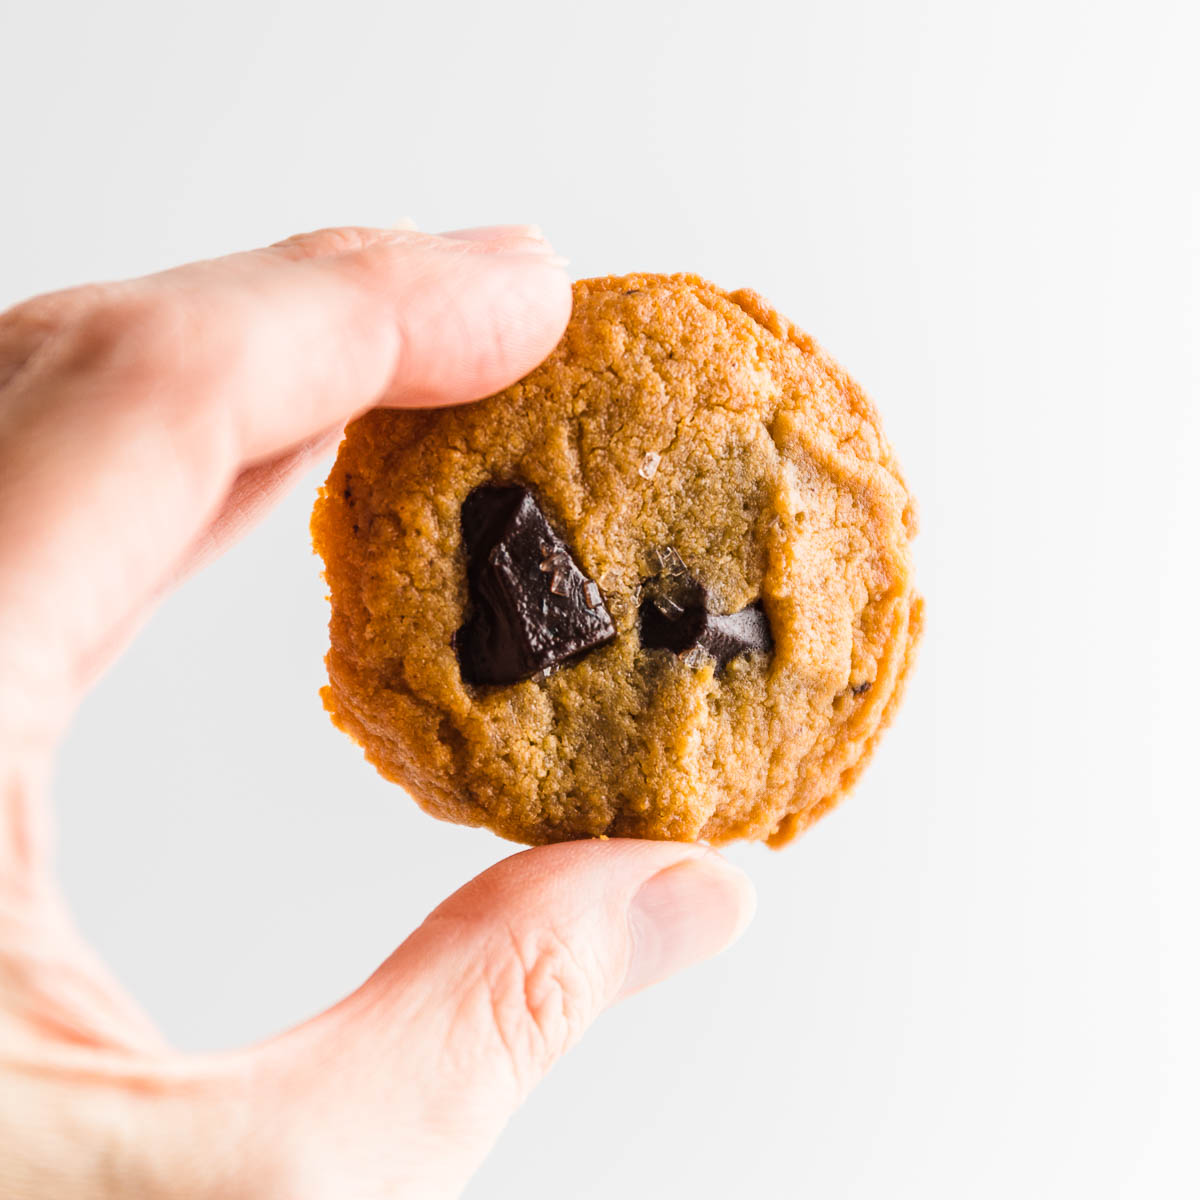 A hand holding one salted chocolate chunk peanut butter cookie.